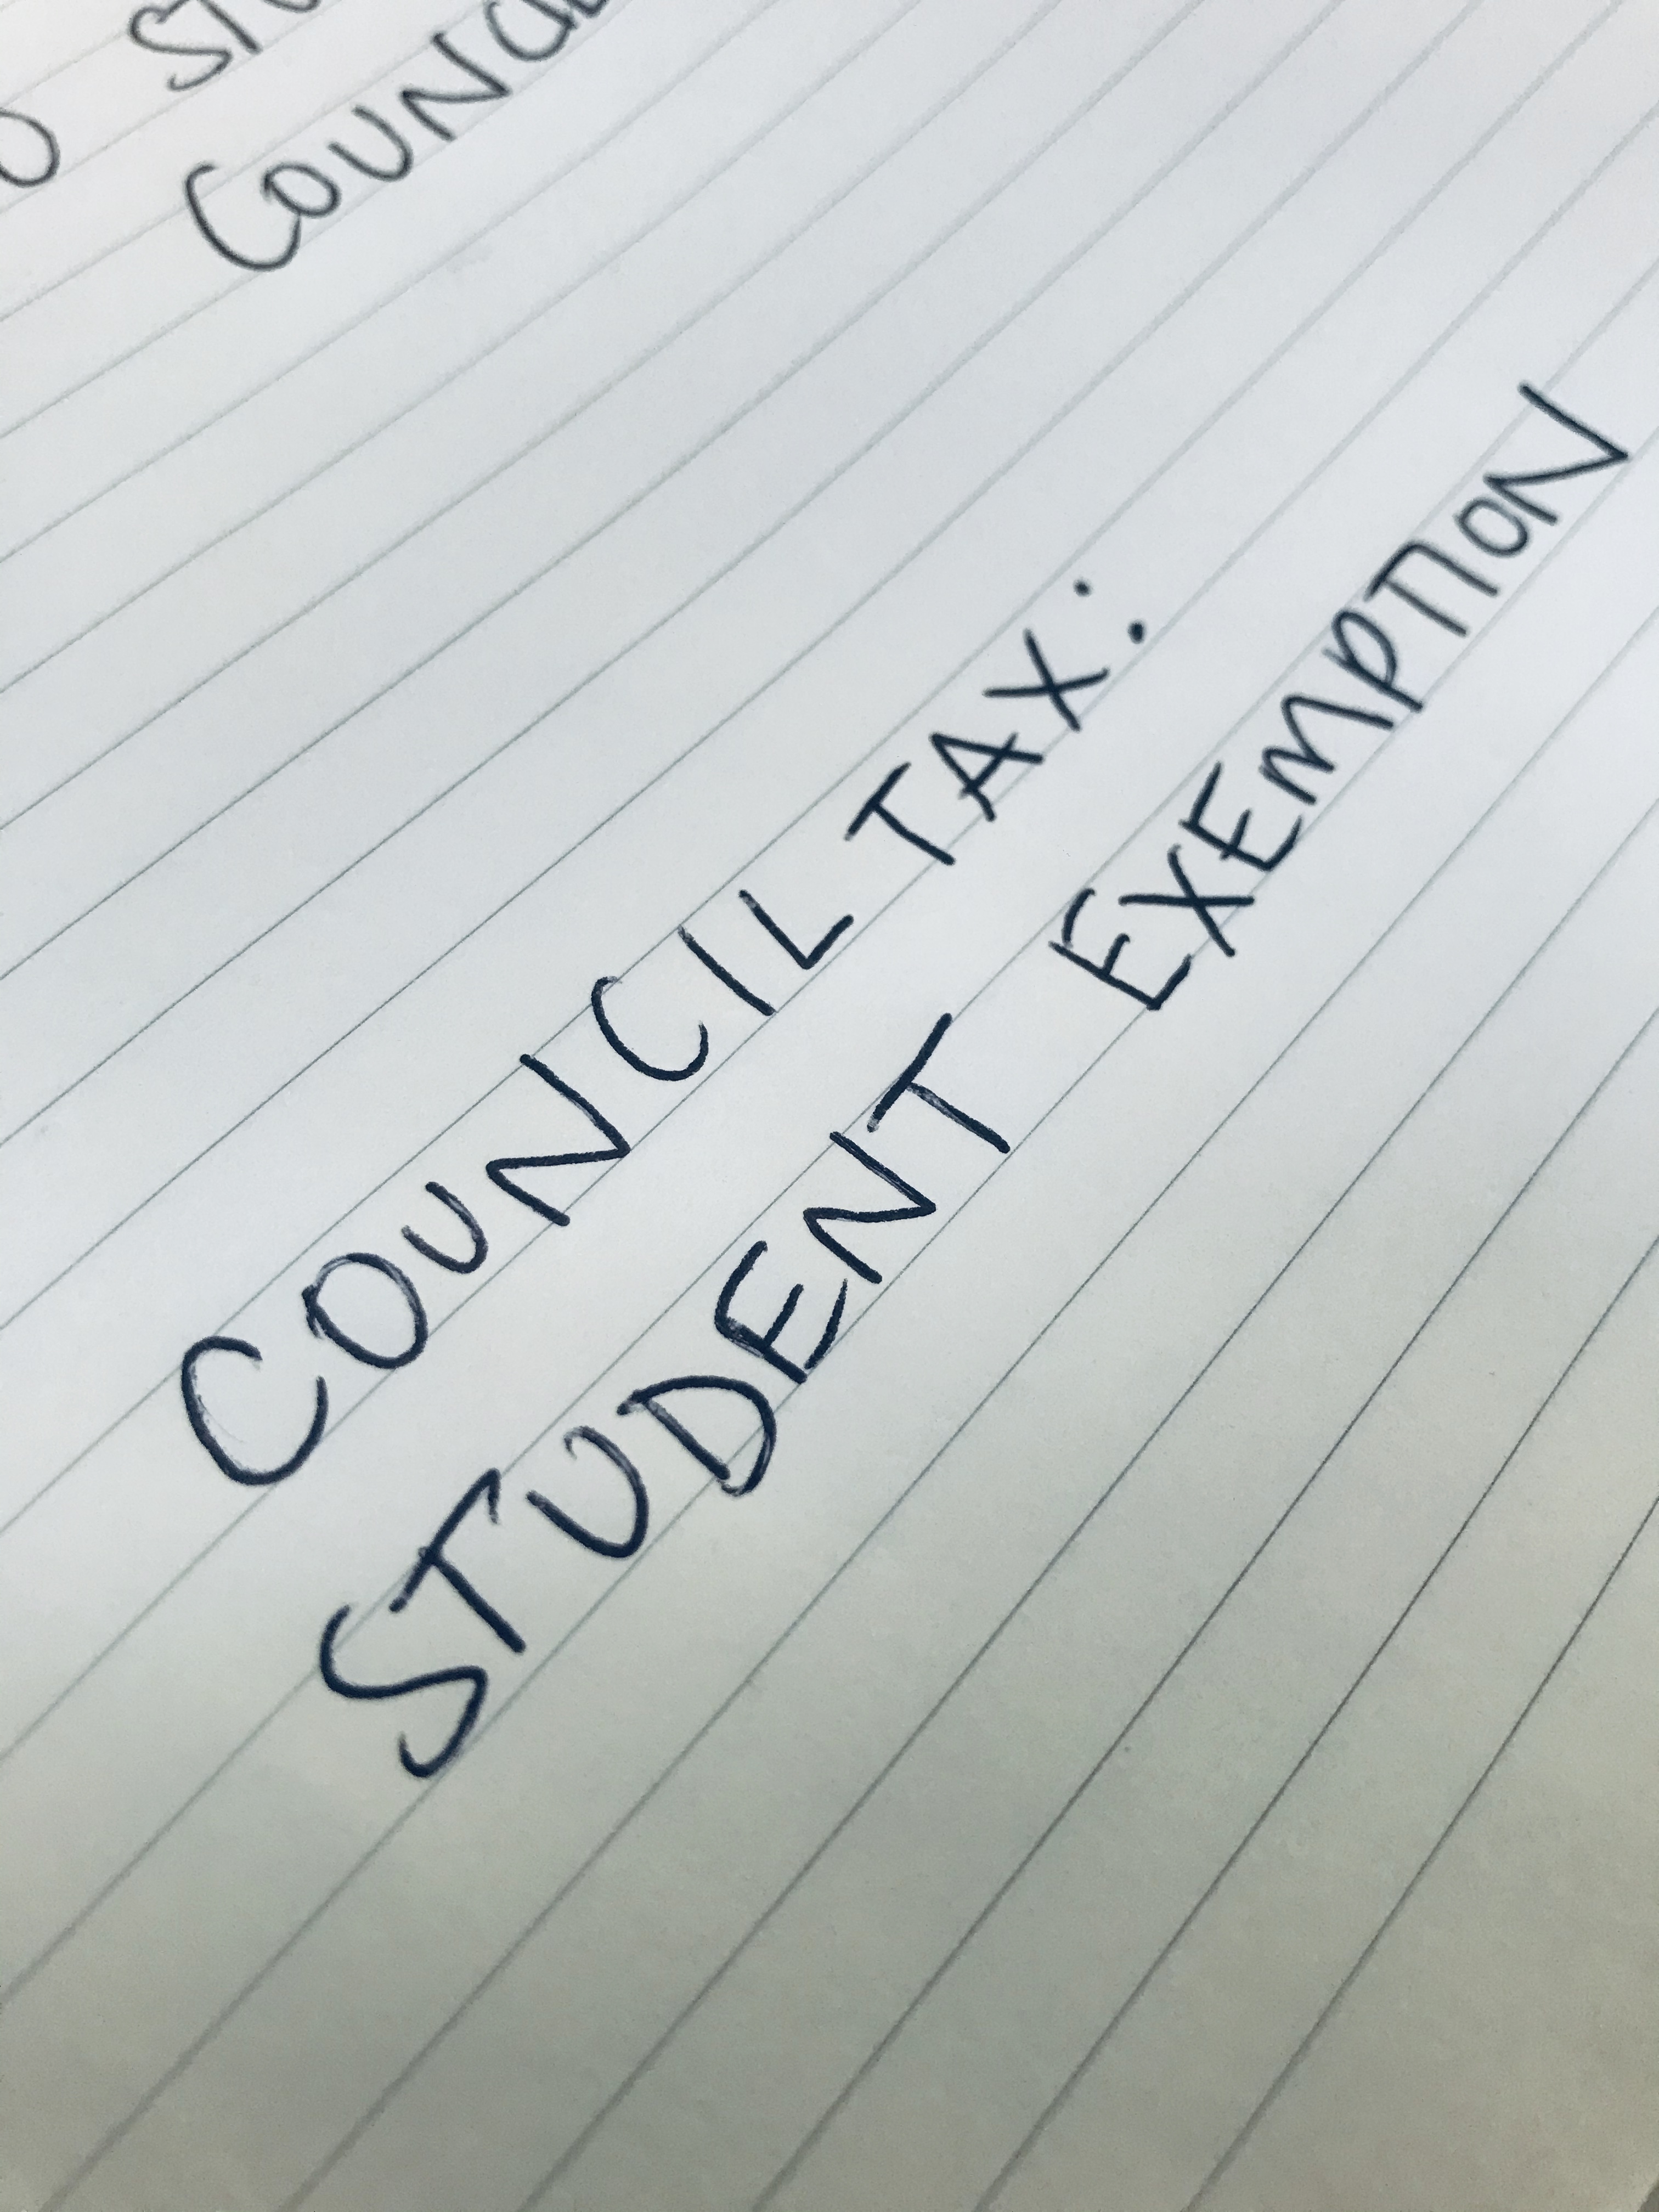 do students have to pay council tax